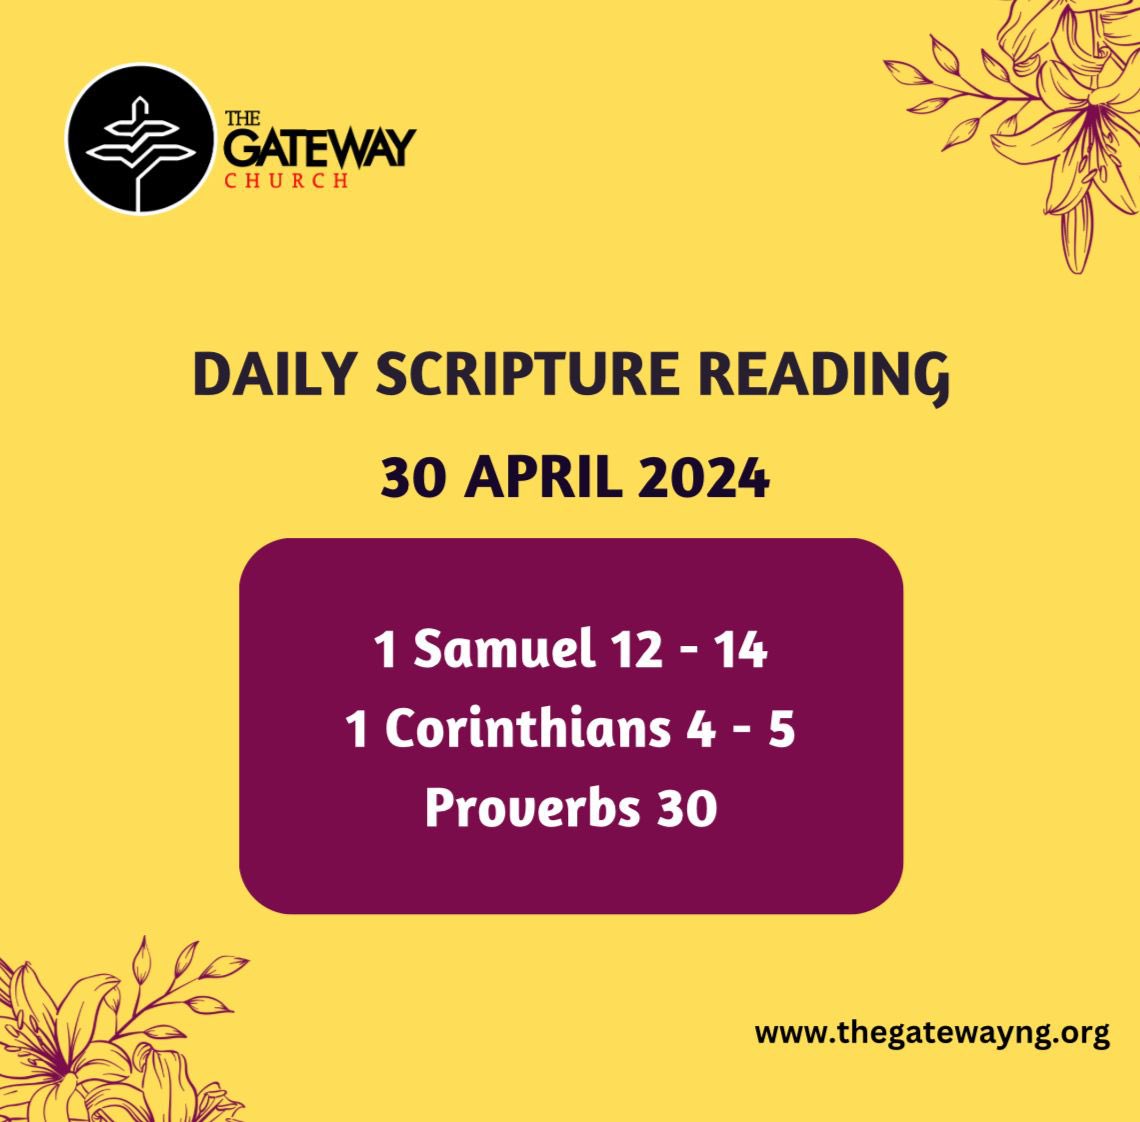 Daily Scripture reading 30 April 2024. #DailyScripture #TheGatewayng